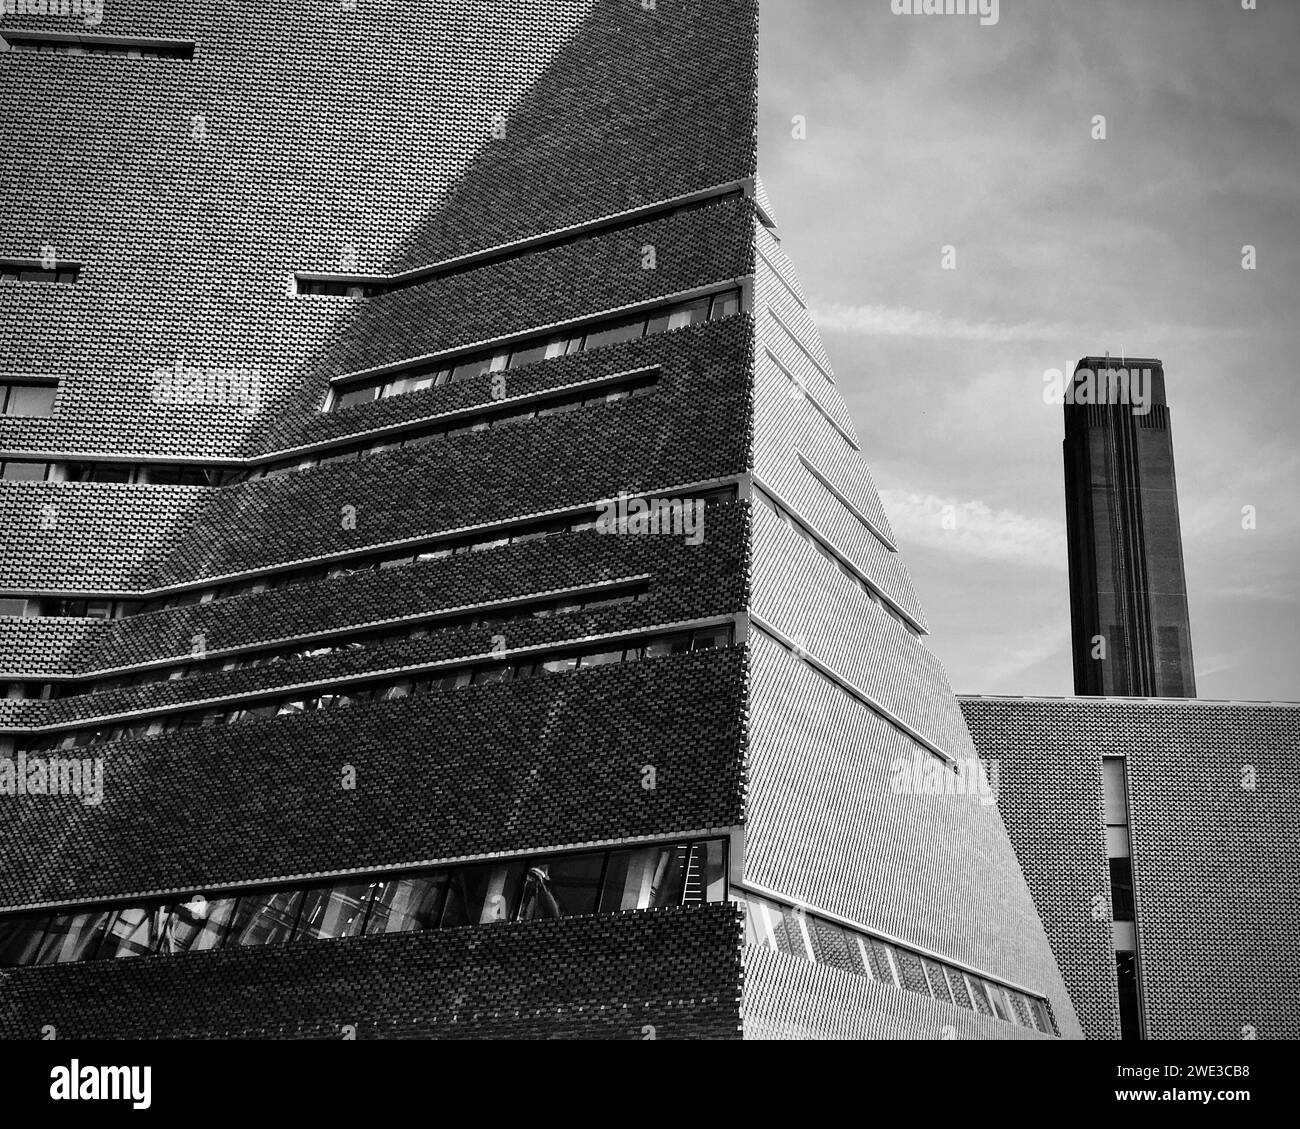 The new and old architecture of the Tate Modern with the large old chimney stack of the Turbine Hall including the new building extension. Stock Photo